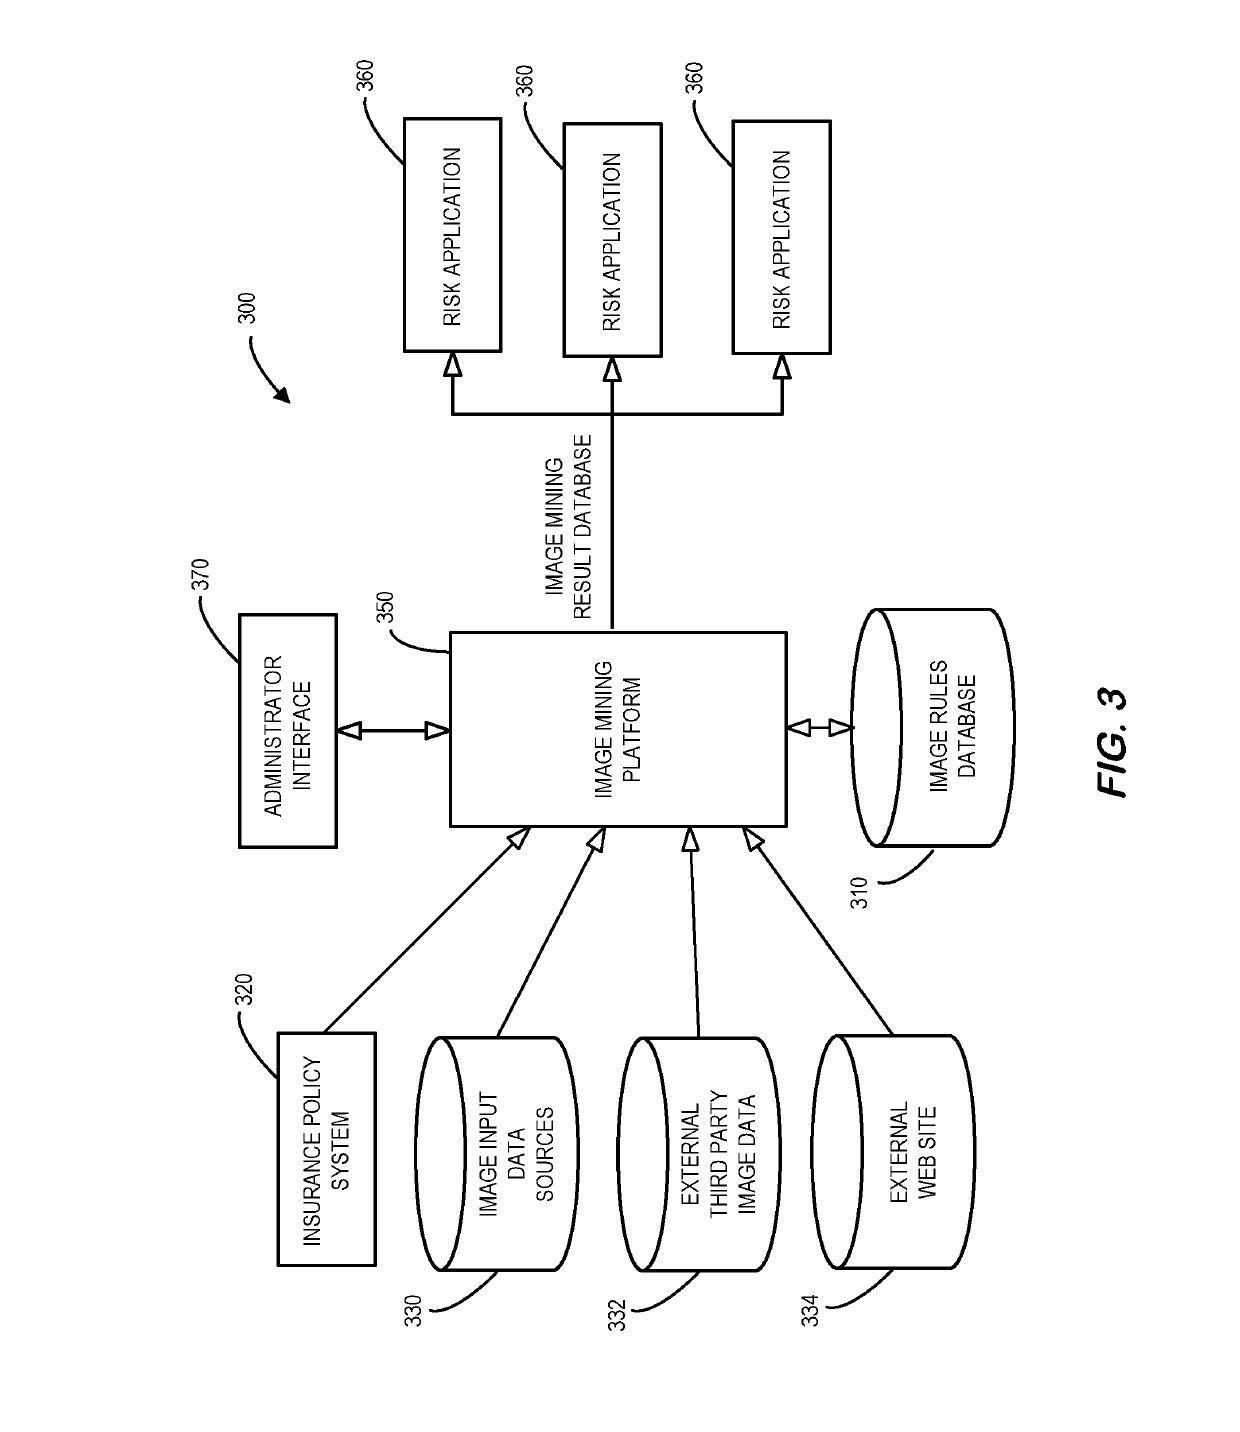 System and method for evaluating images to support multiple risk applications